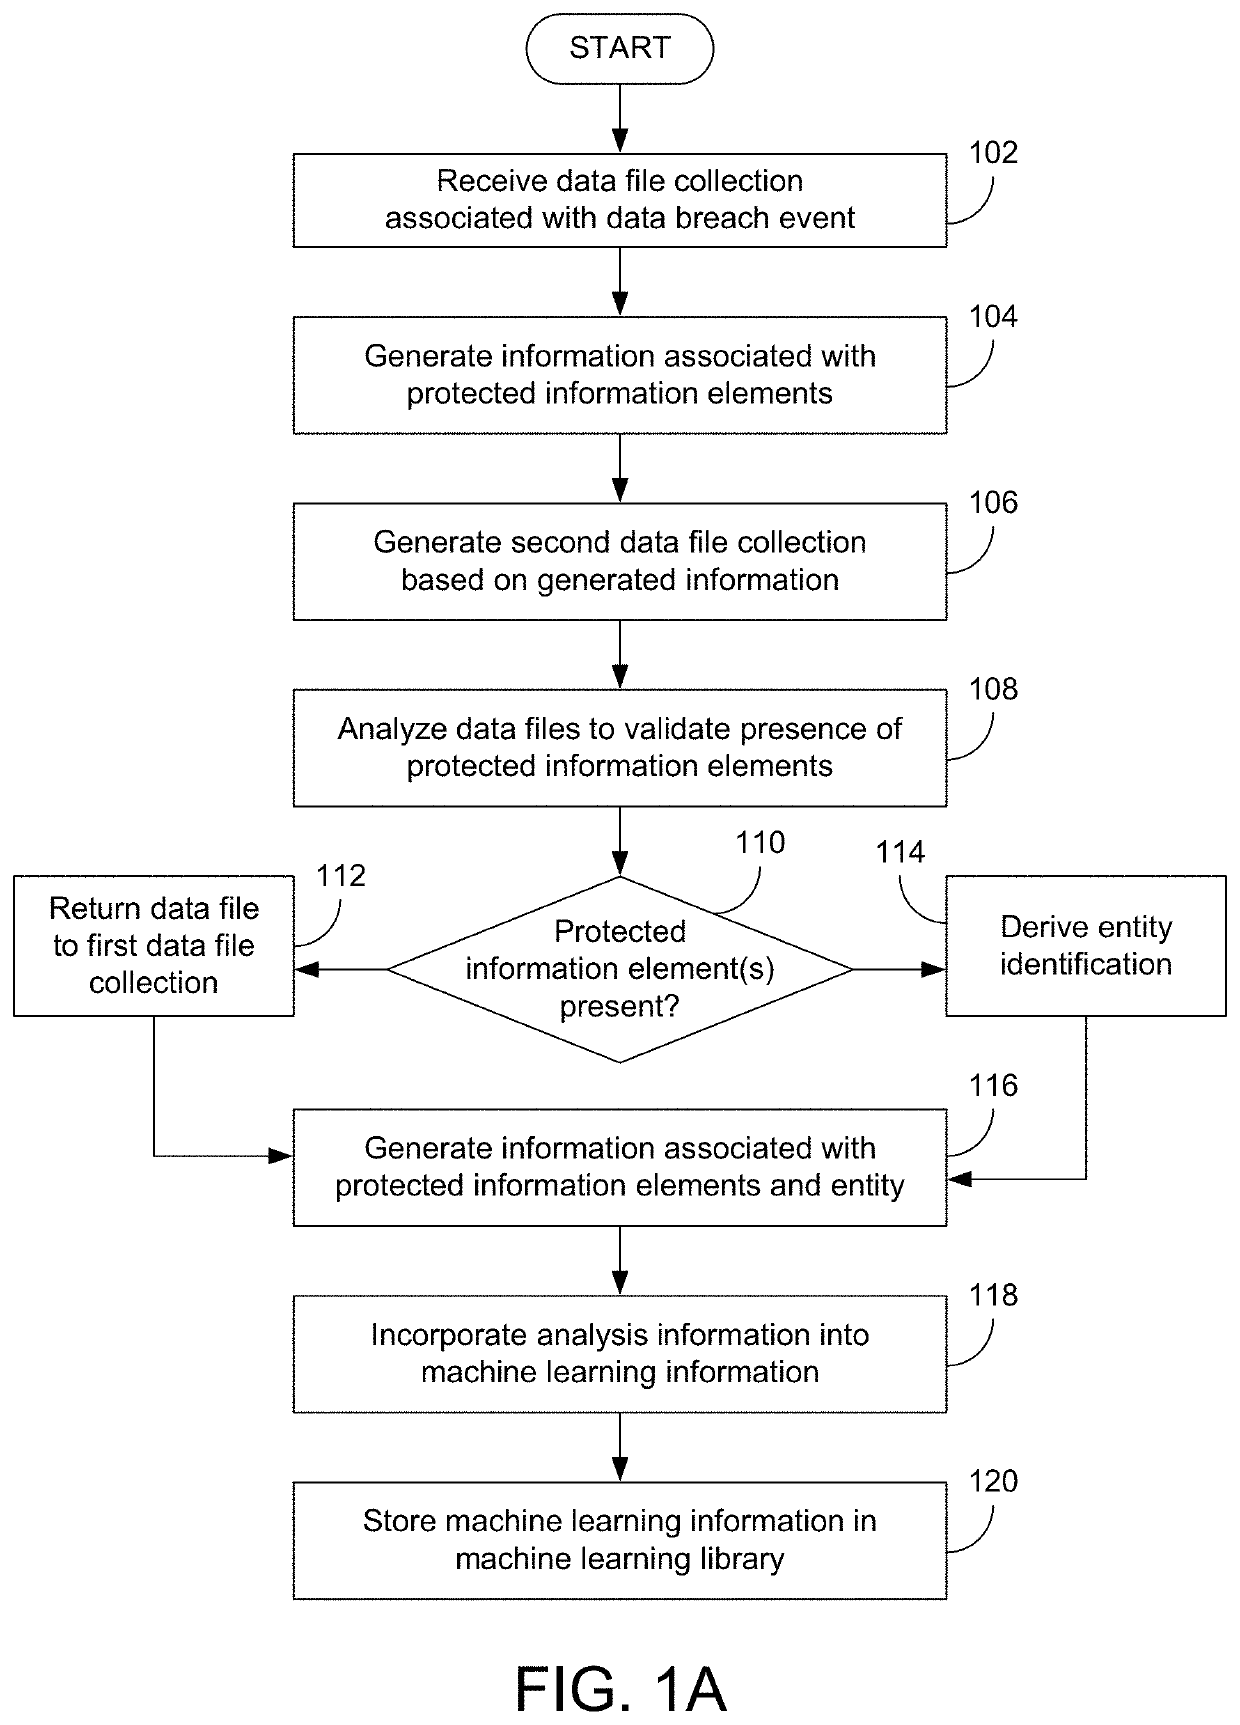 Systems And Methods For Identifying Compliance-Related Information Associated With Data Breach Events